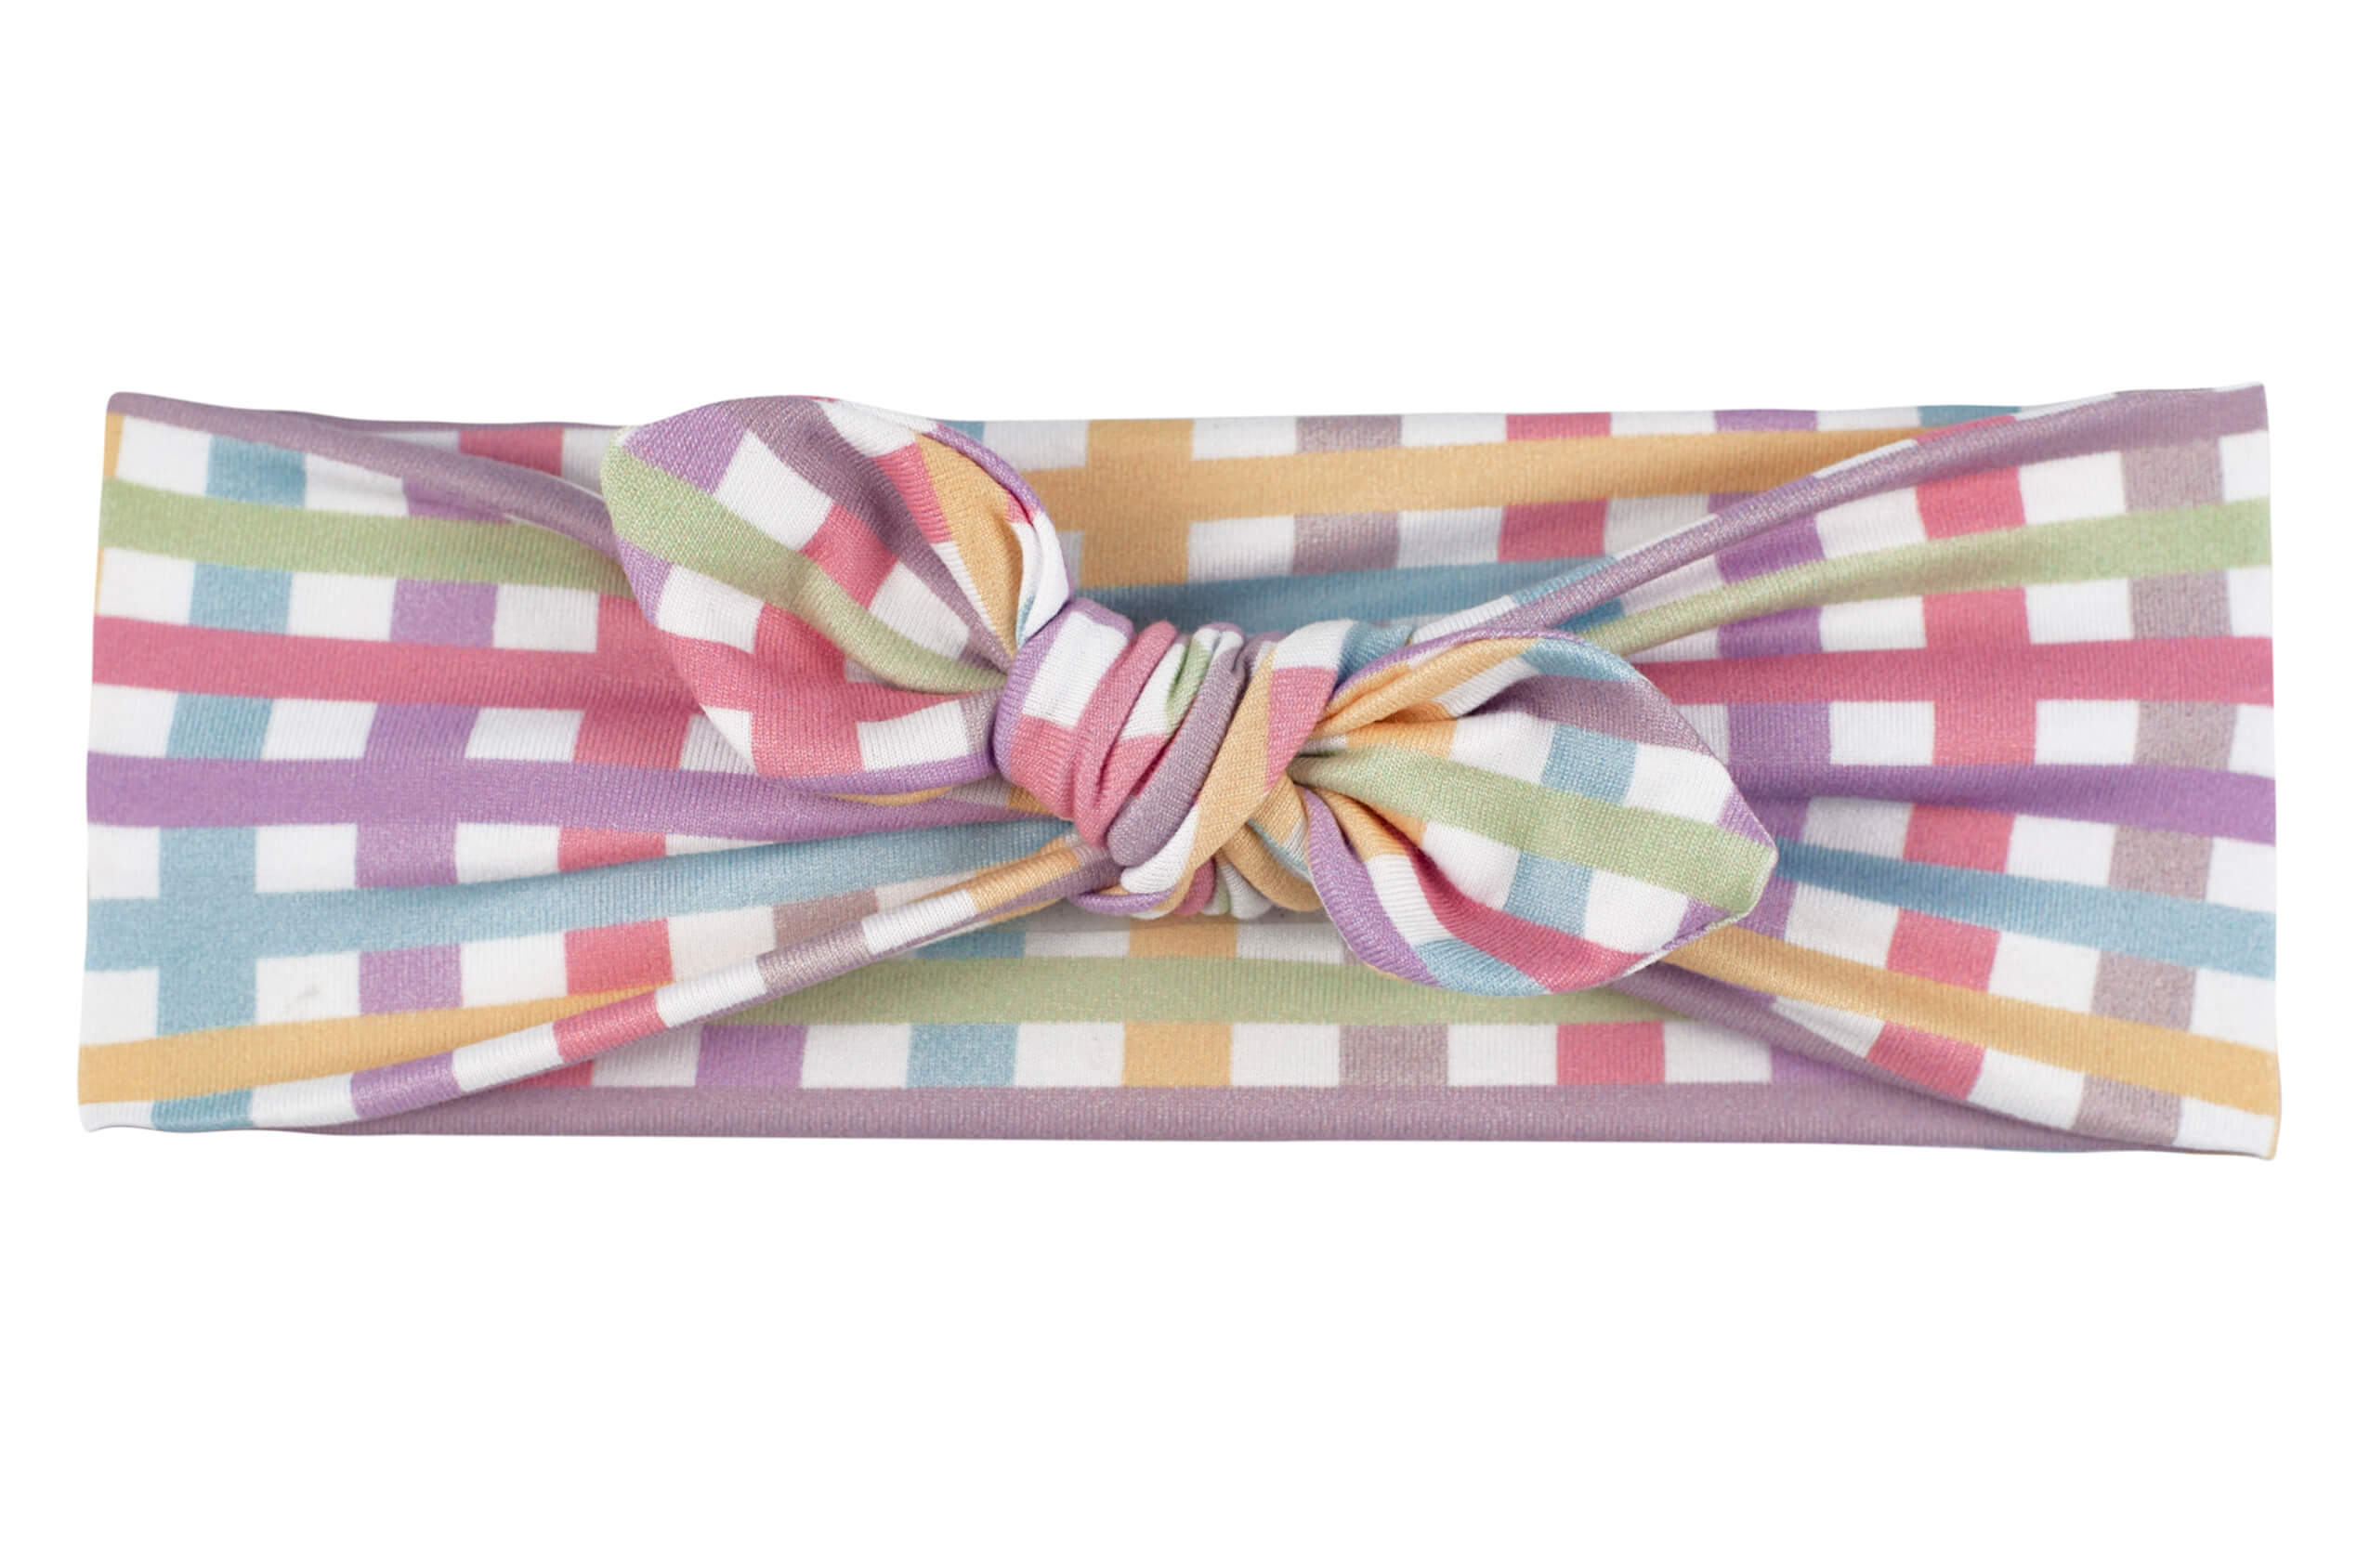 A handmade knotted headband featuring a plaid pattern for little girls from By Bella Boutique.